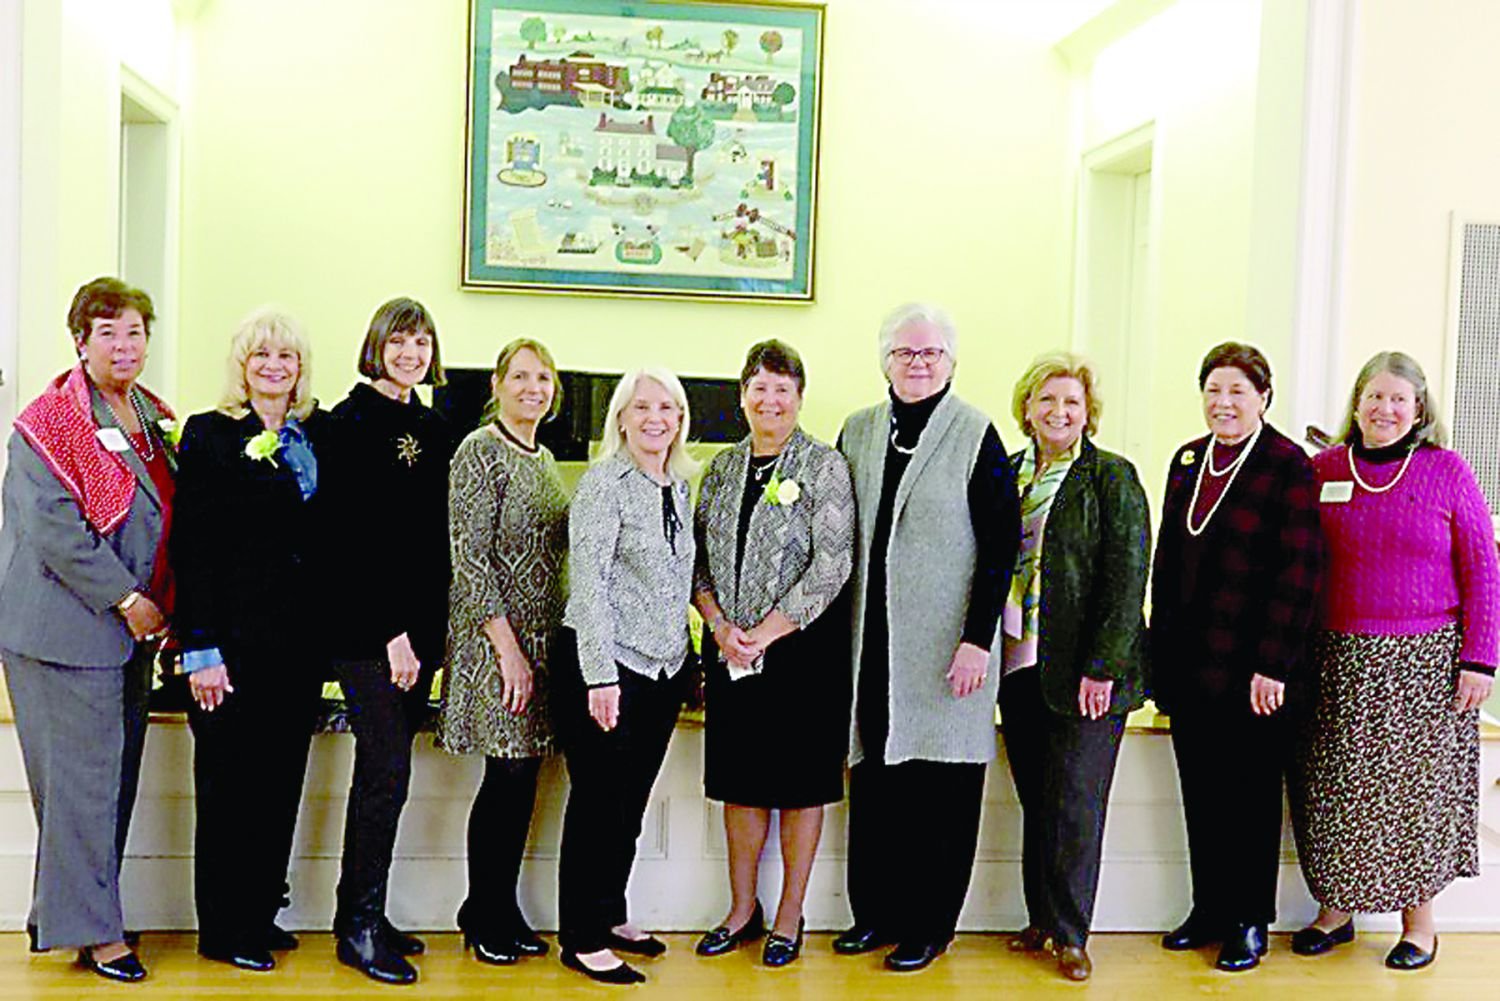 Past honorees of the Women’s History Month Awards attended the 2019 meeting. From left are   Francine Block, Kathleen Horwatt, Constance Basktek-Karasow, Maggie Leigh Groff, Peggy Dator, Jane Grim, this year’s honoree, Tam St. Claire, Cynthia M. Rufe, Nancy Morrill and Marne Kies Dietterich. Missing is Joan Parlee. Photograph by Kathy Weidner, League of Women Voters.